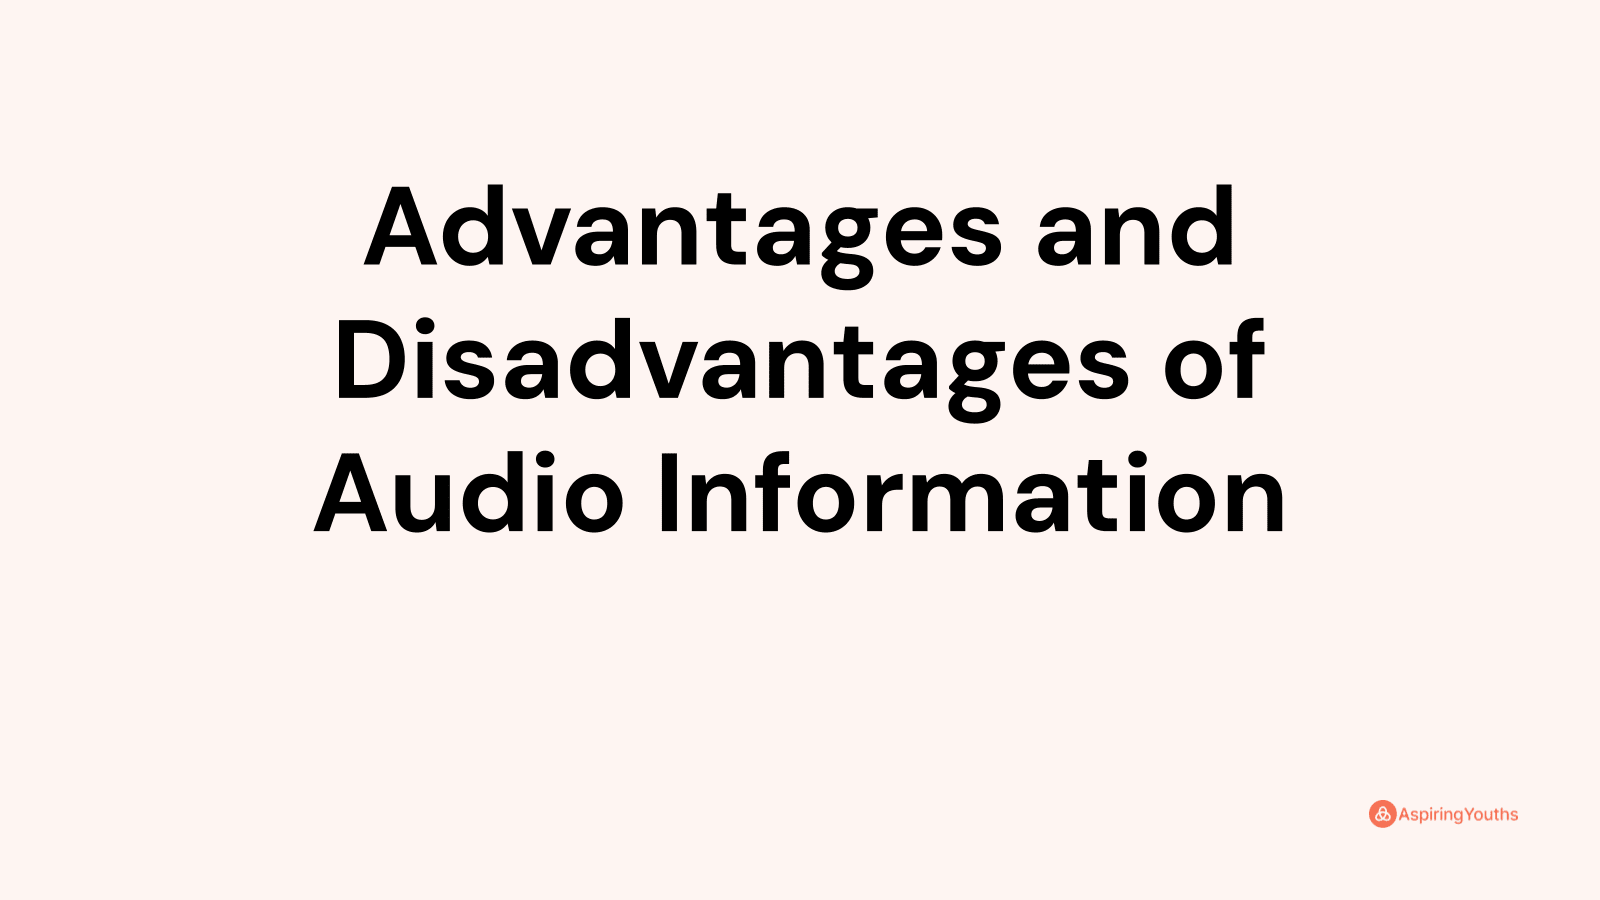 Advantages and disadvantages of Audio Information